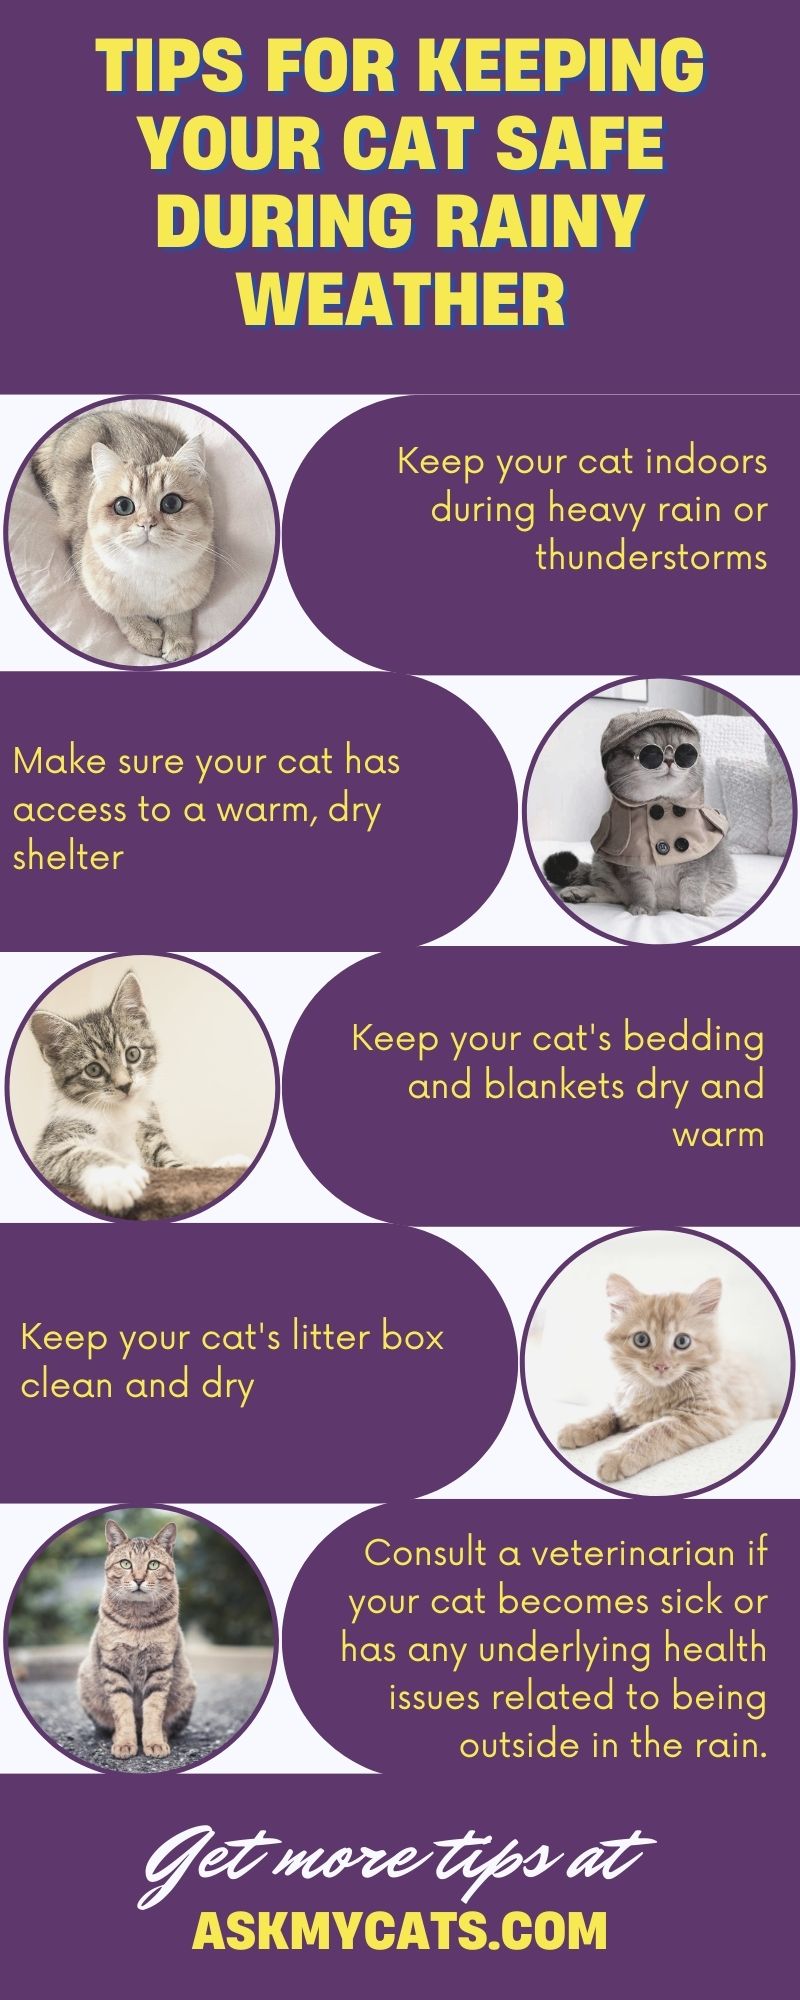 Tips for Keeping Your Cat Safe During Rainy Weather (Infographic)